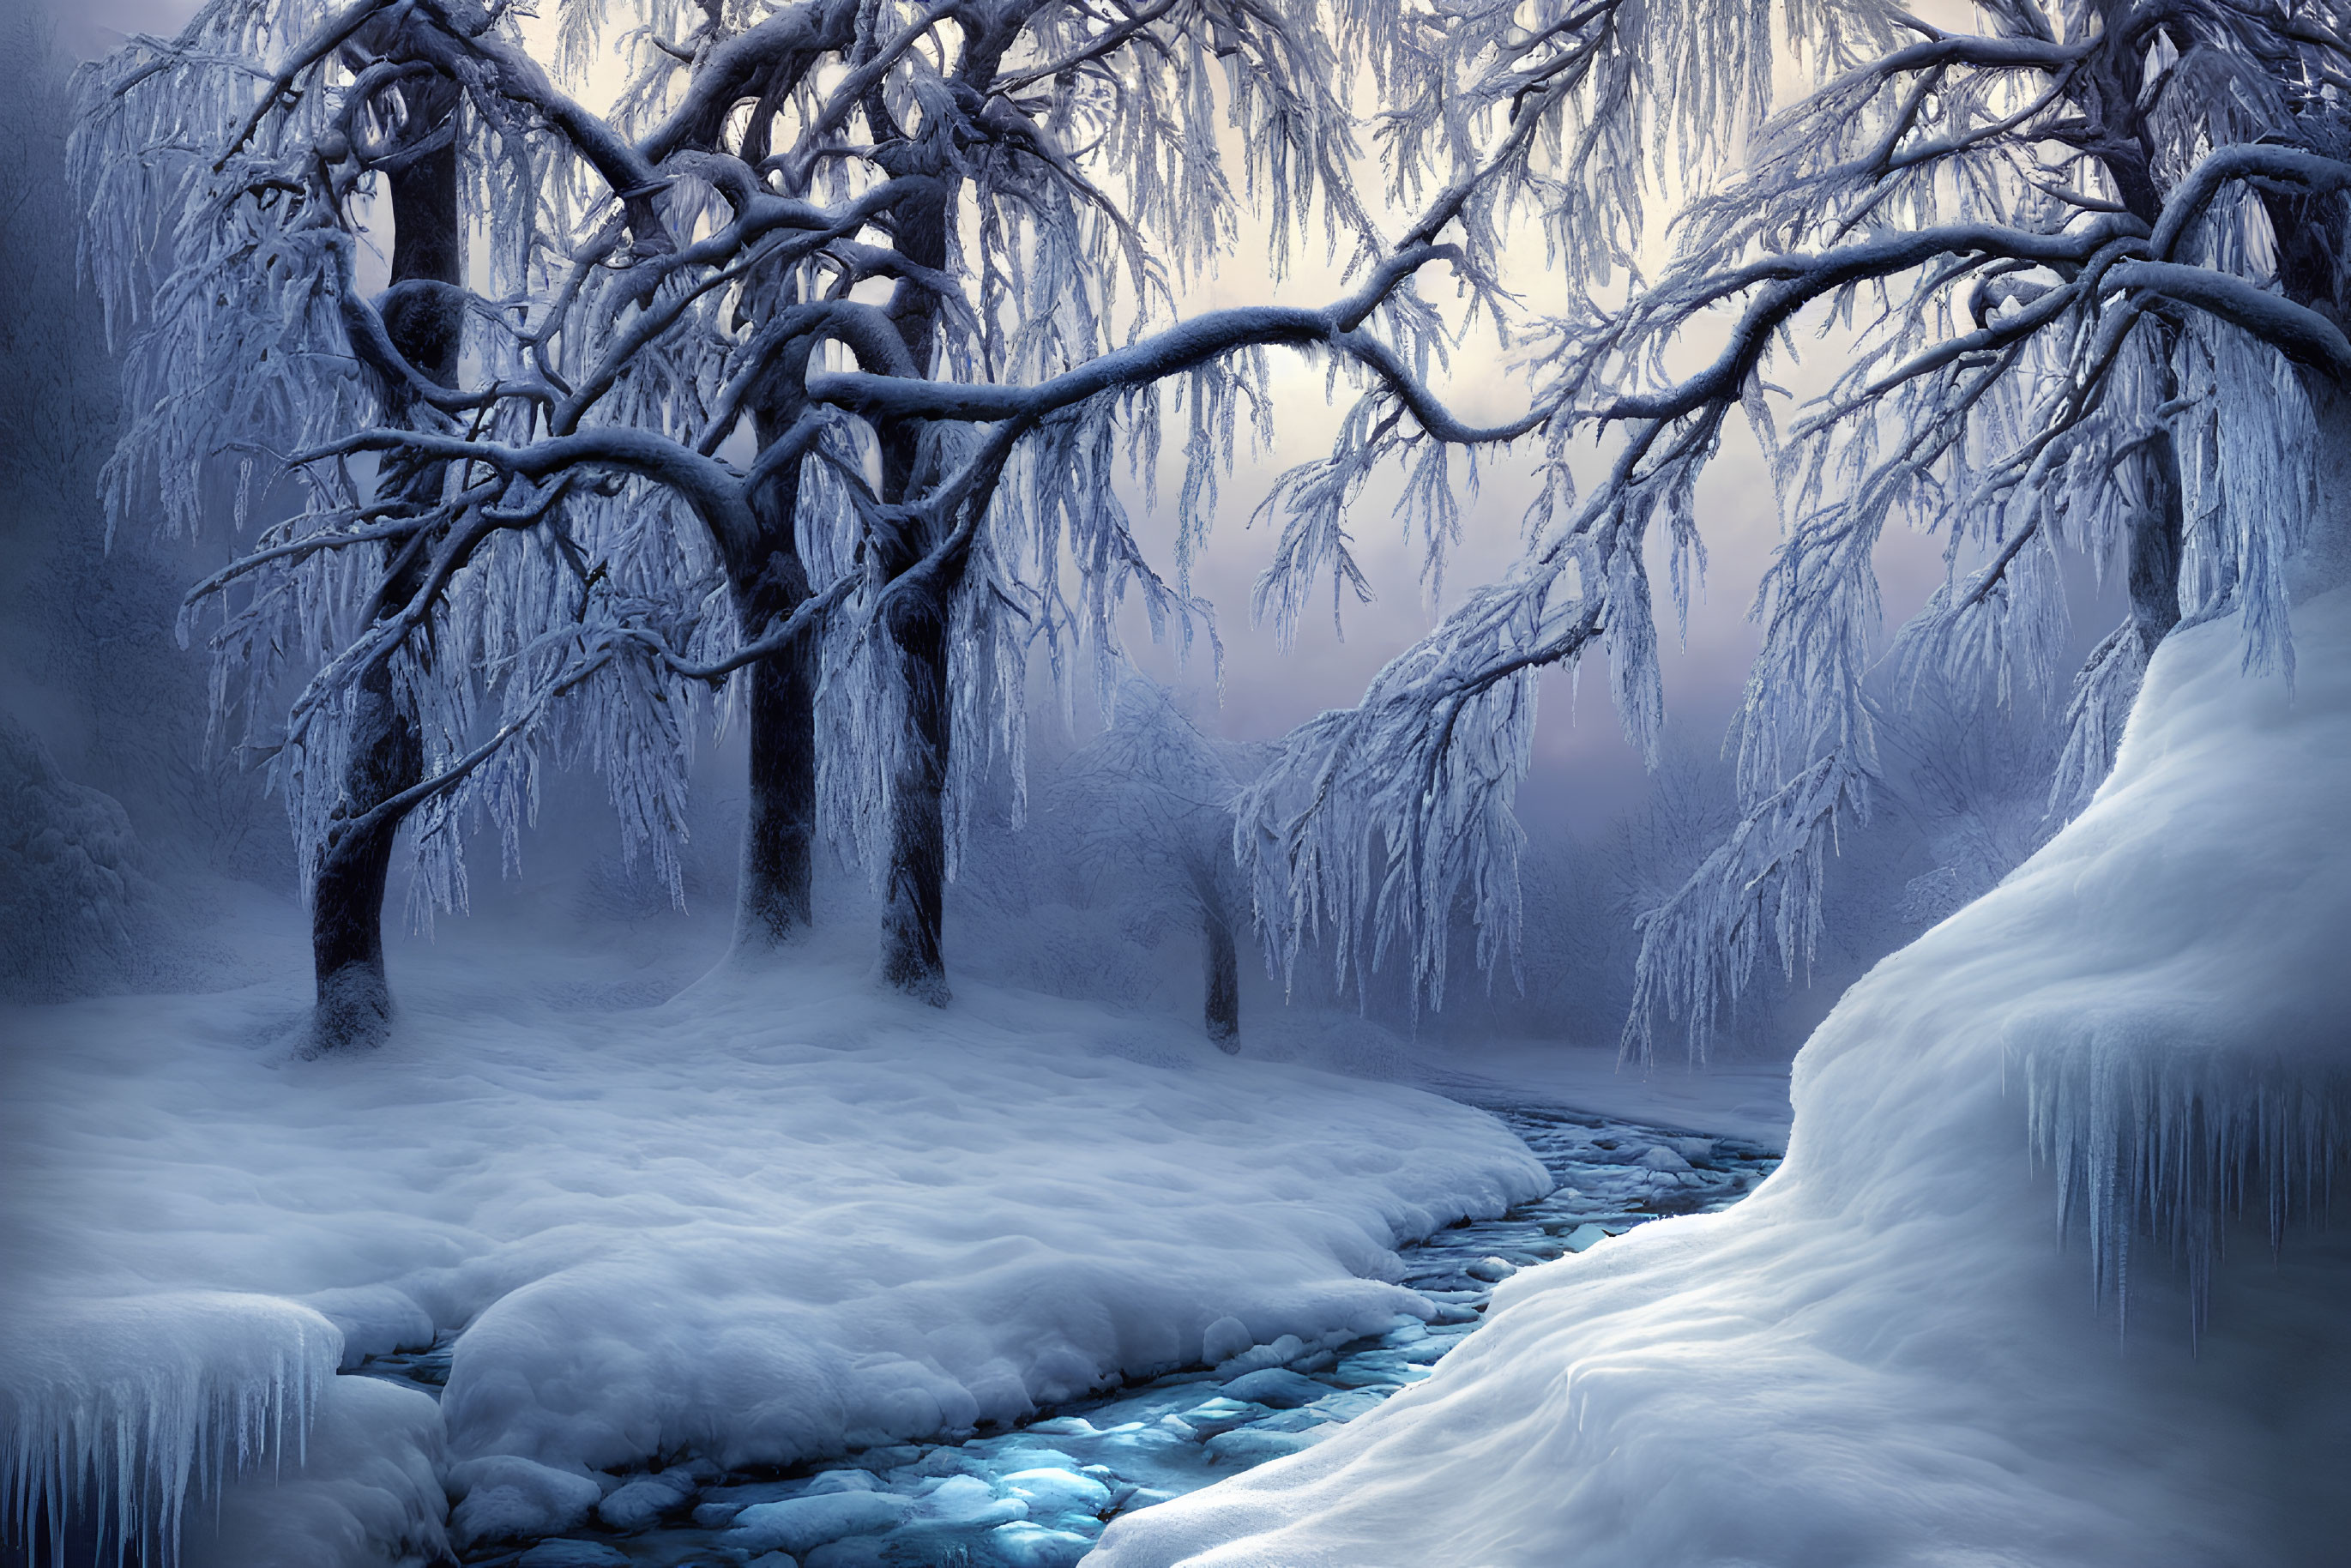 Snow-covered winter landscape with frozen trees and stream under misty blue sky